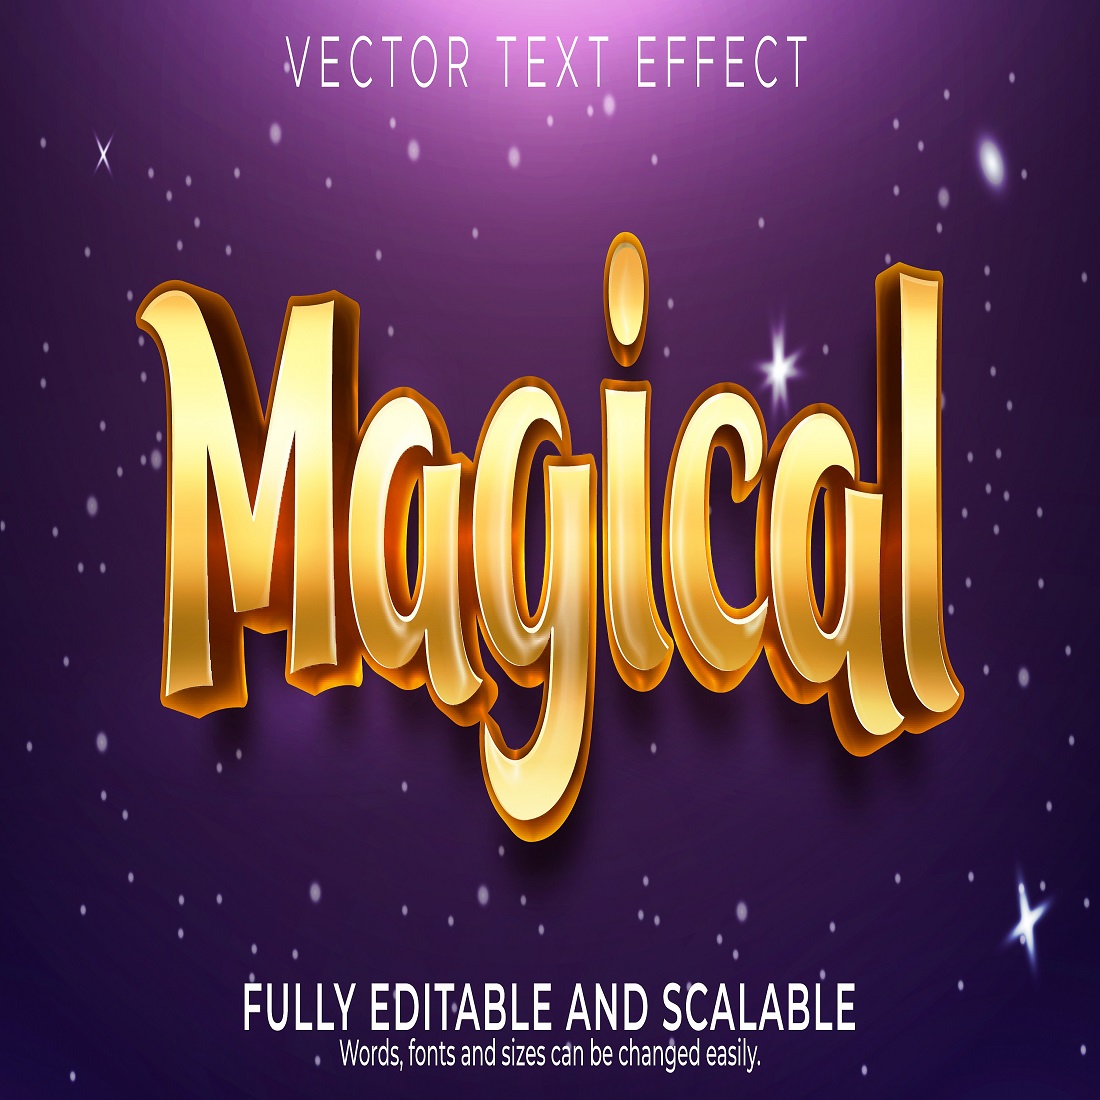 Magical golden text effect editable fairy tale text style preview image.